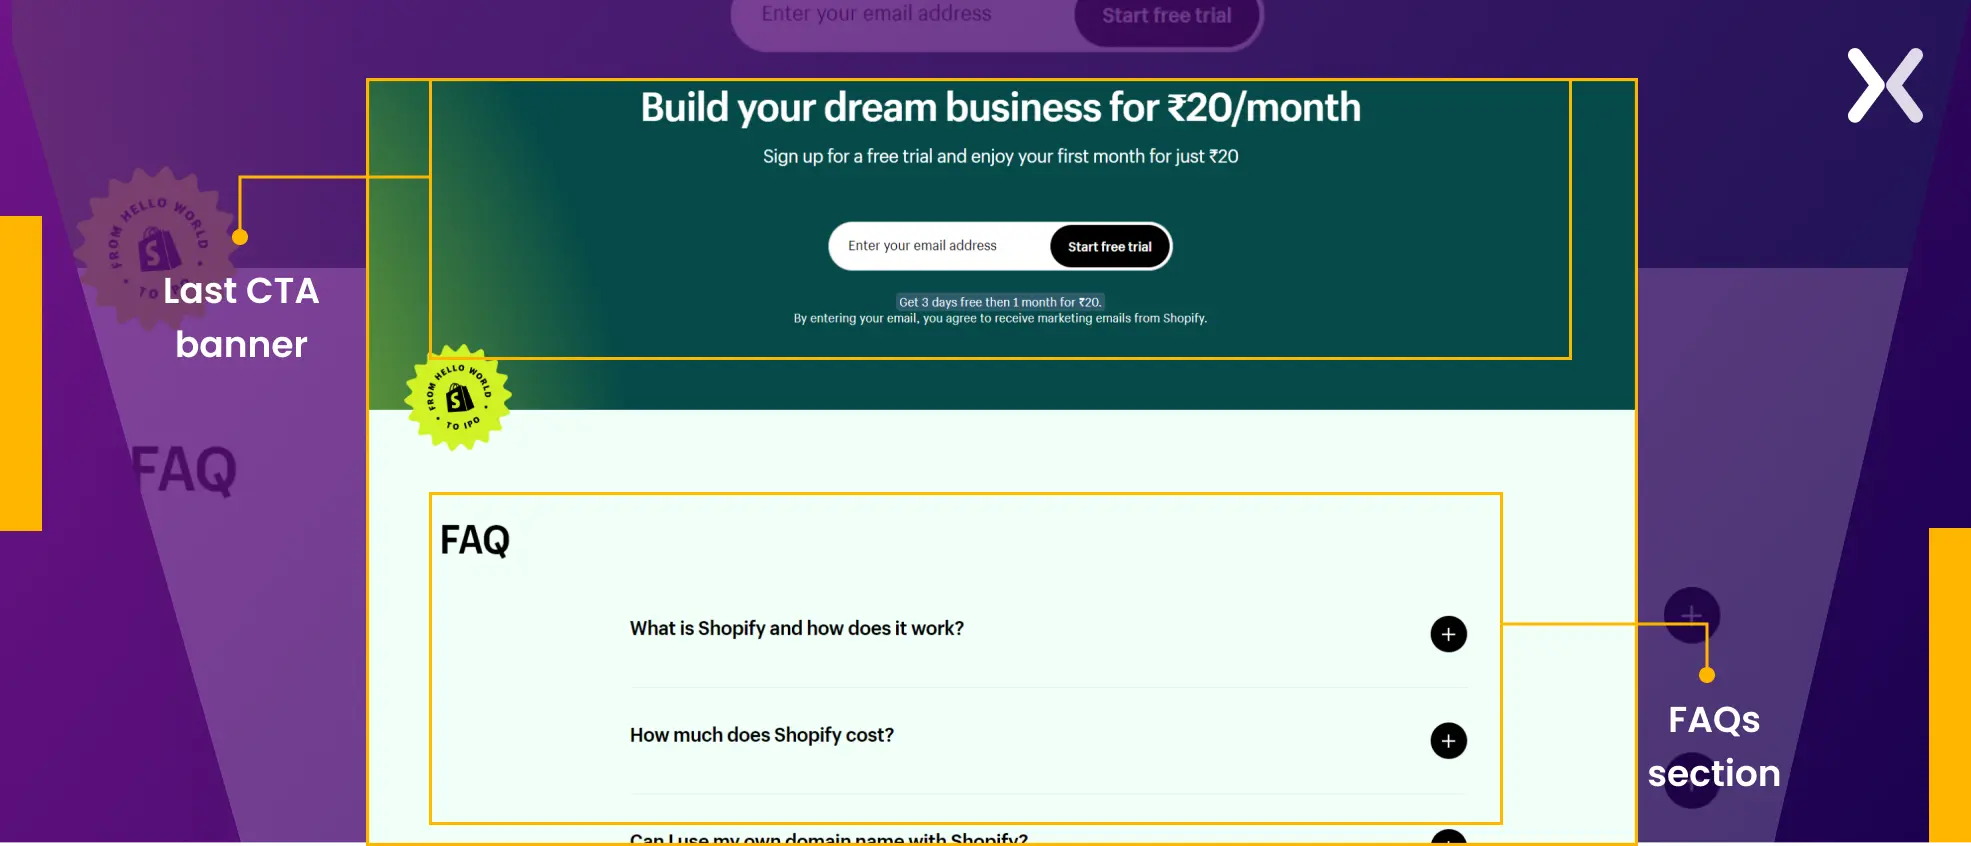 free-trial-landing-page-with-faqs-and-banner.webp